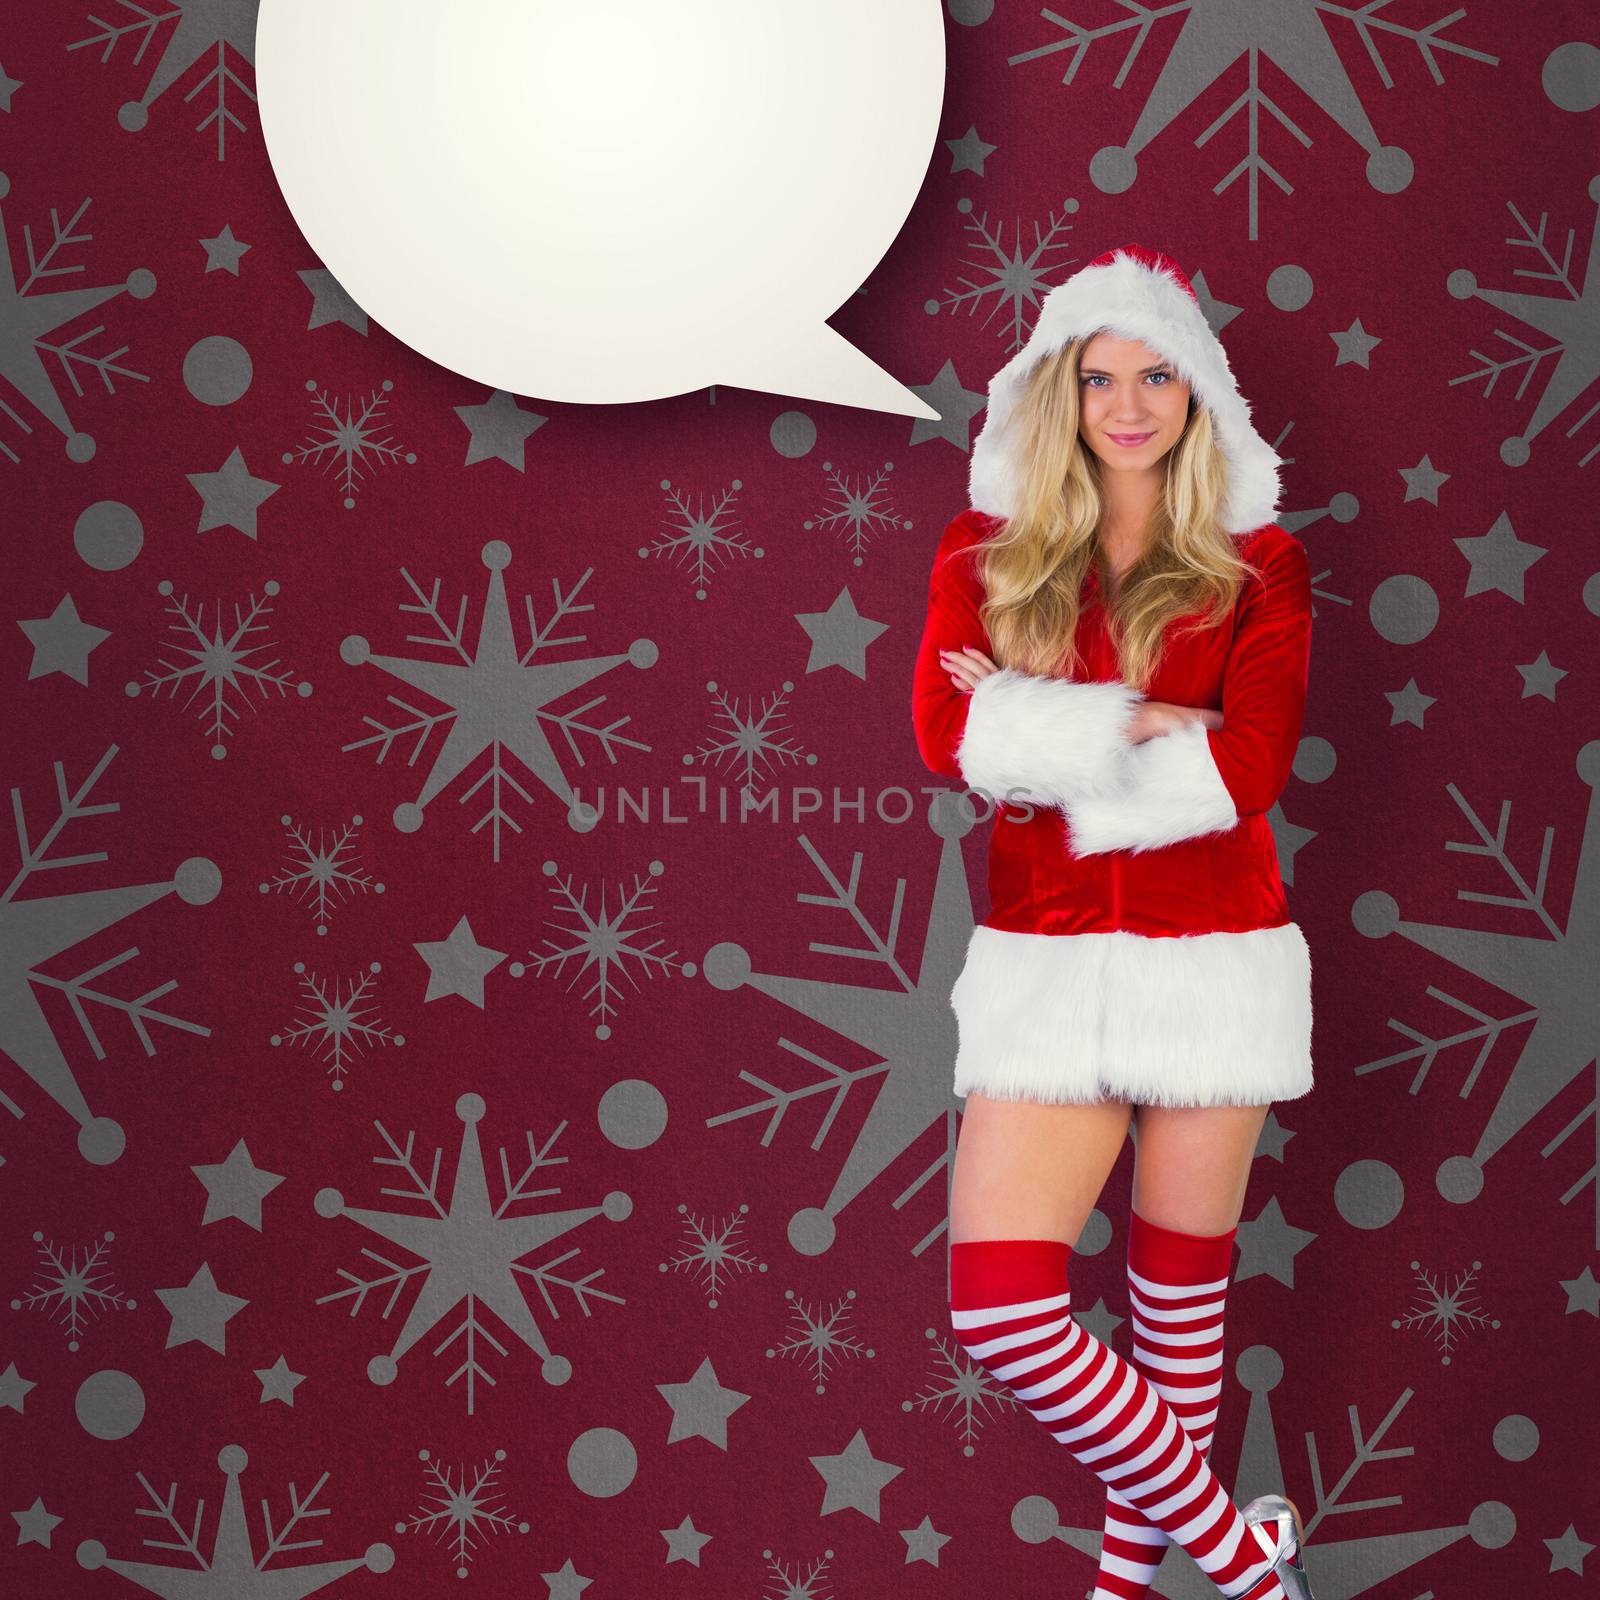 Pretty girl in santa outfit with arms crossed against red vignette